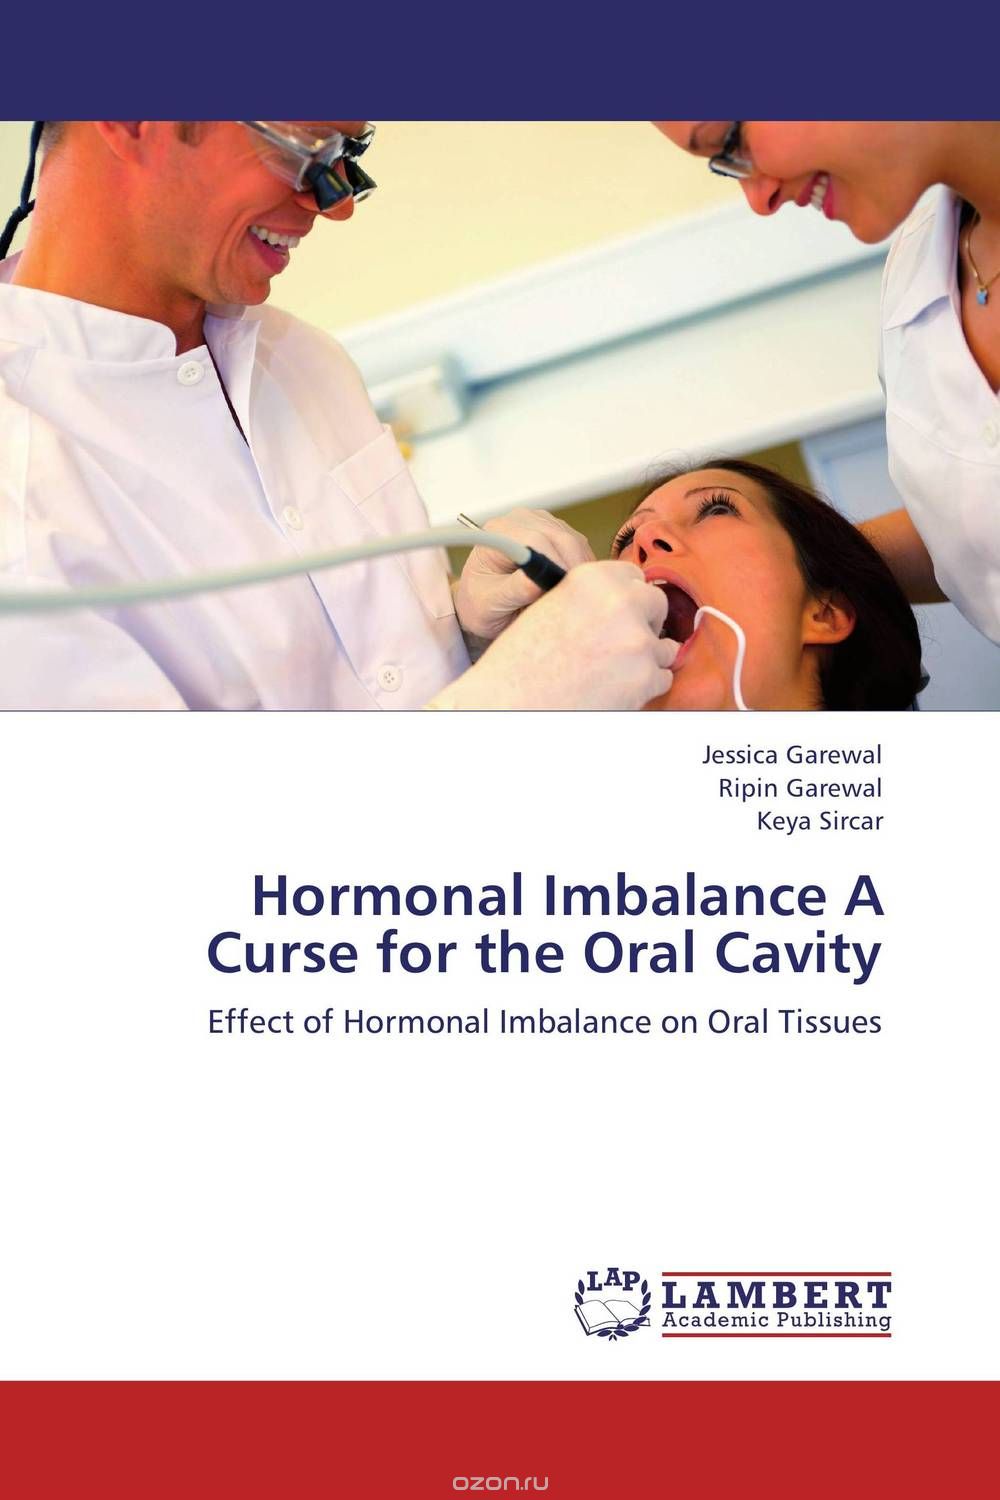 Hormonal Imbalance A Curse for the Oral Cavity